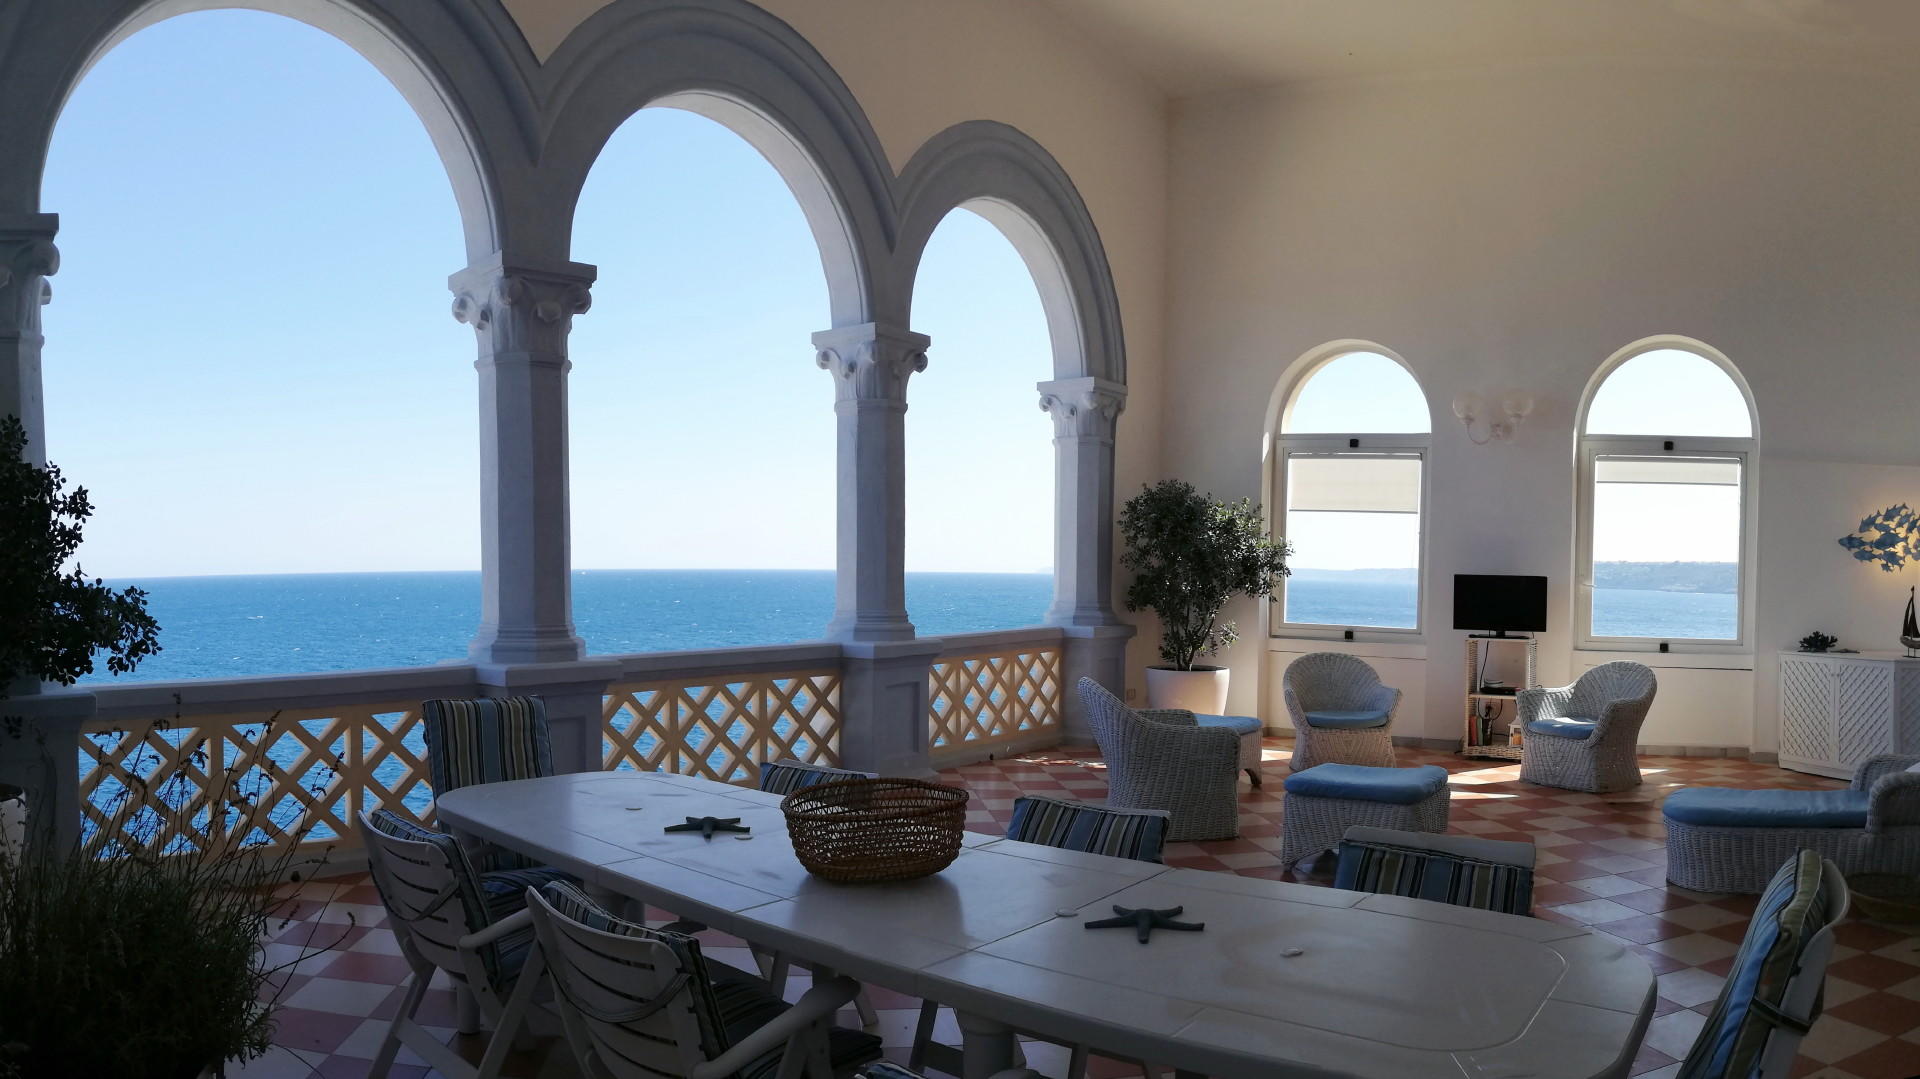 Equipped porch with sea view